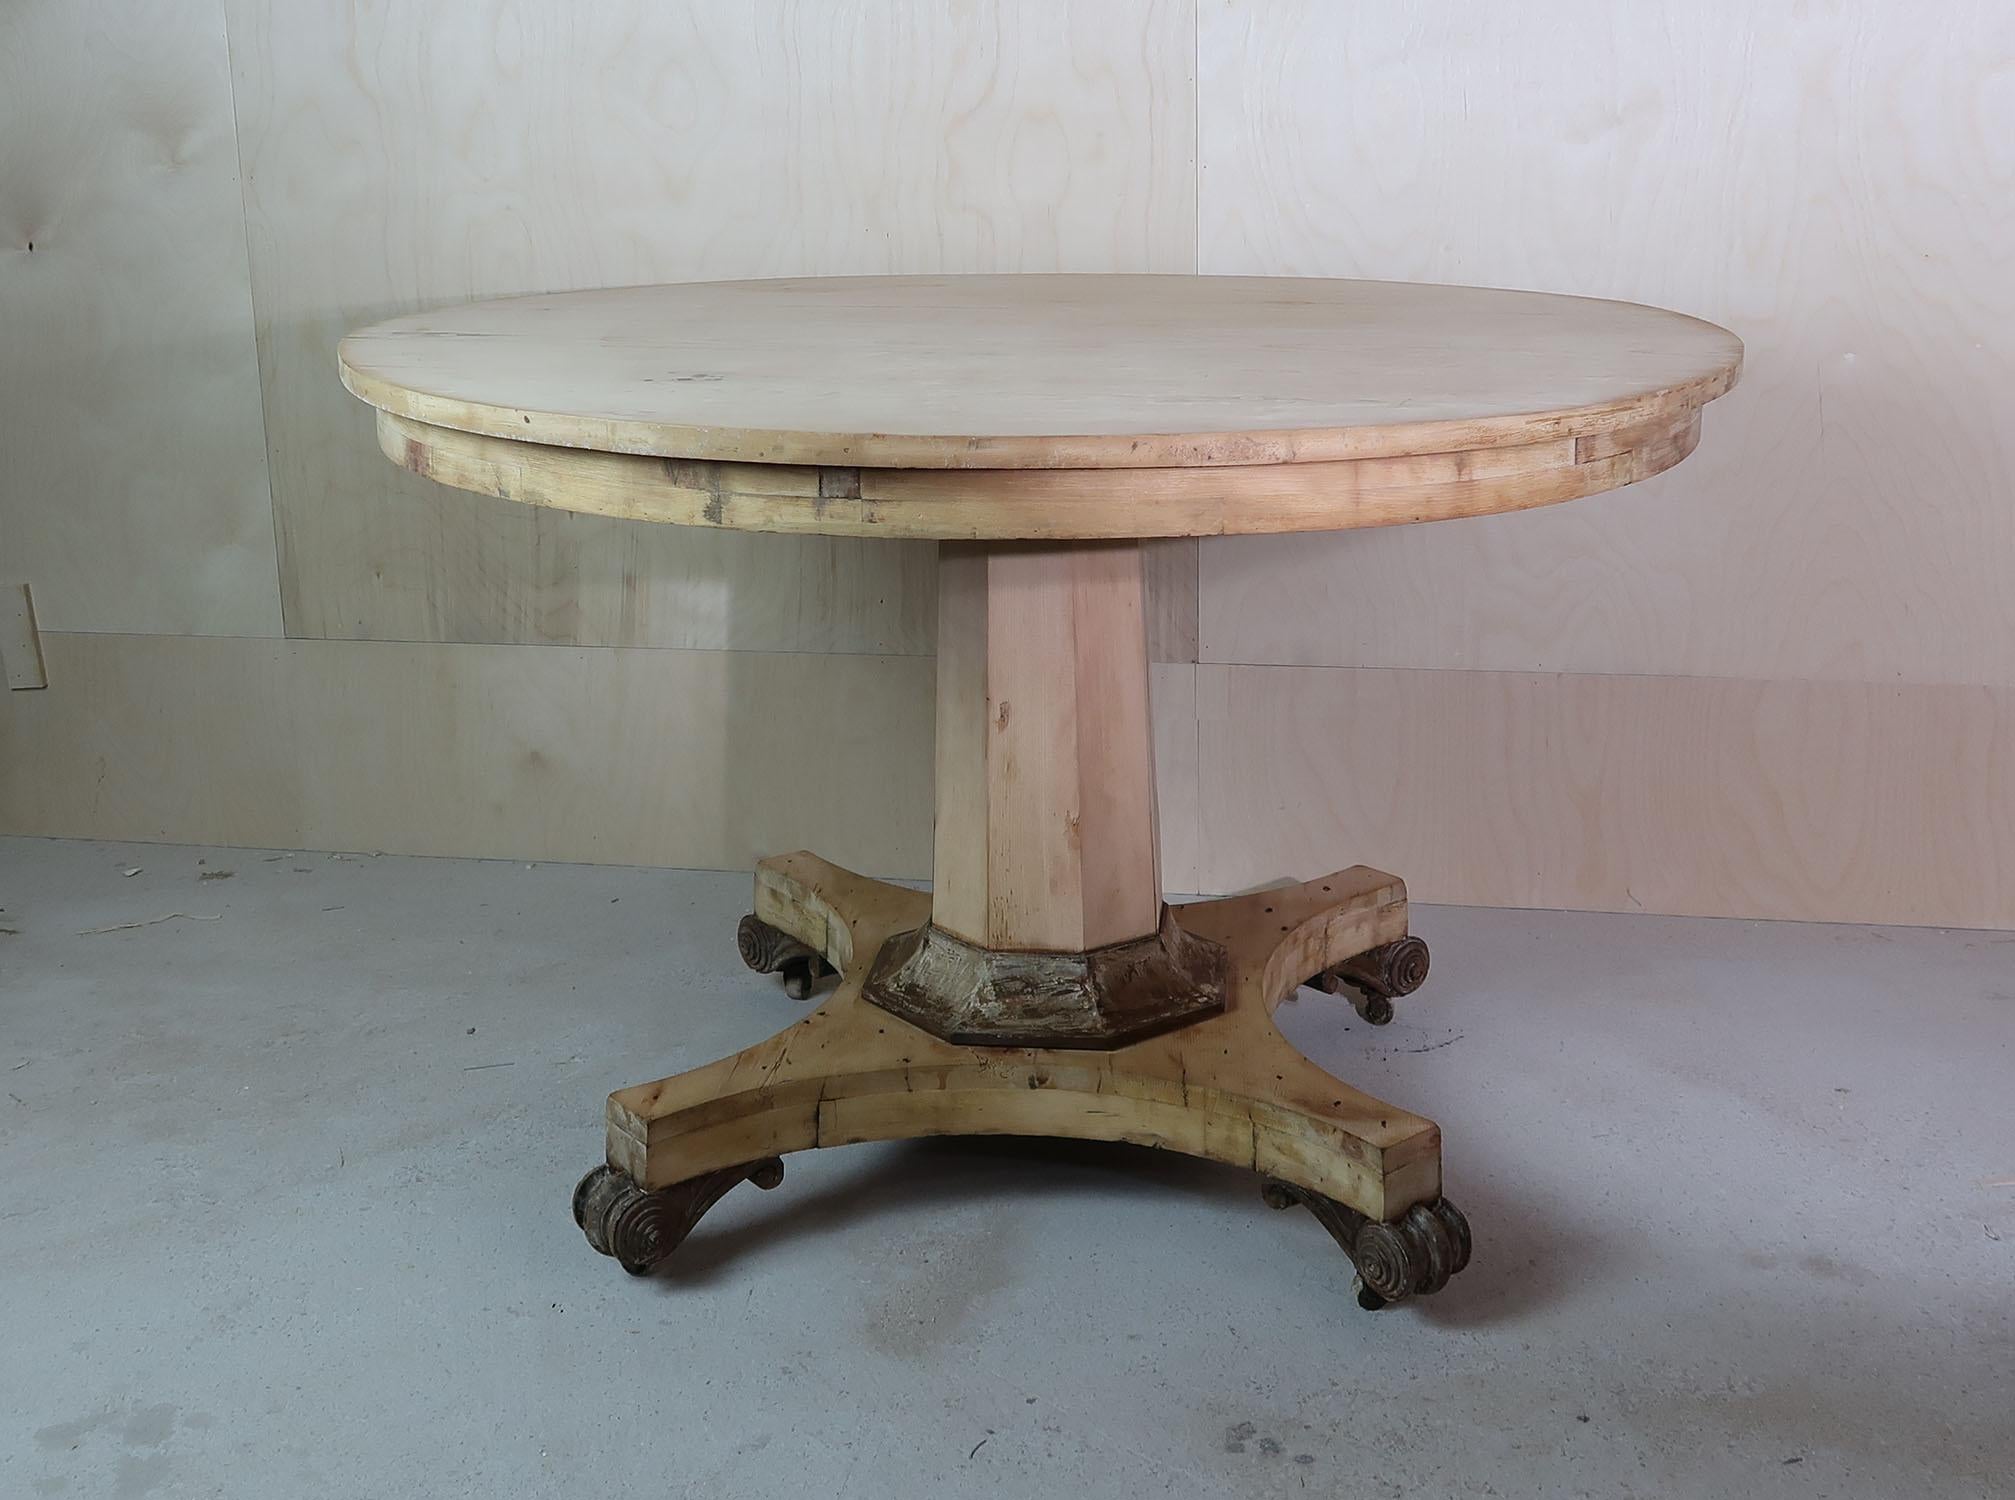 Fabulous large round Georgian table. Made from pine with bleached tropical hardwood detail to the base of the column support and feet.

Beautifully figured top.

Great simple lines. I particularly like the plain column and the anthemion shaped